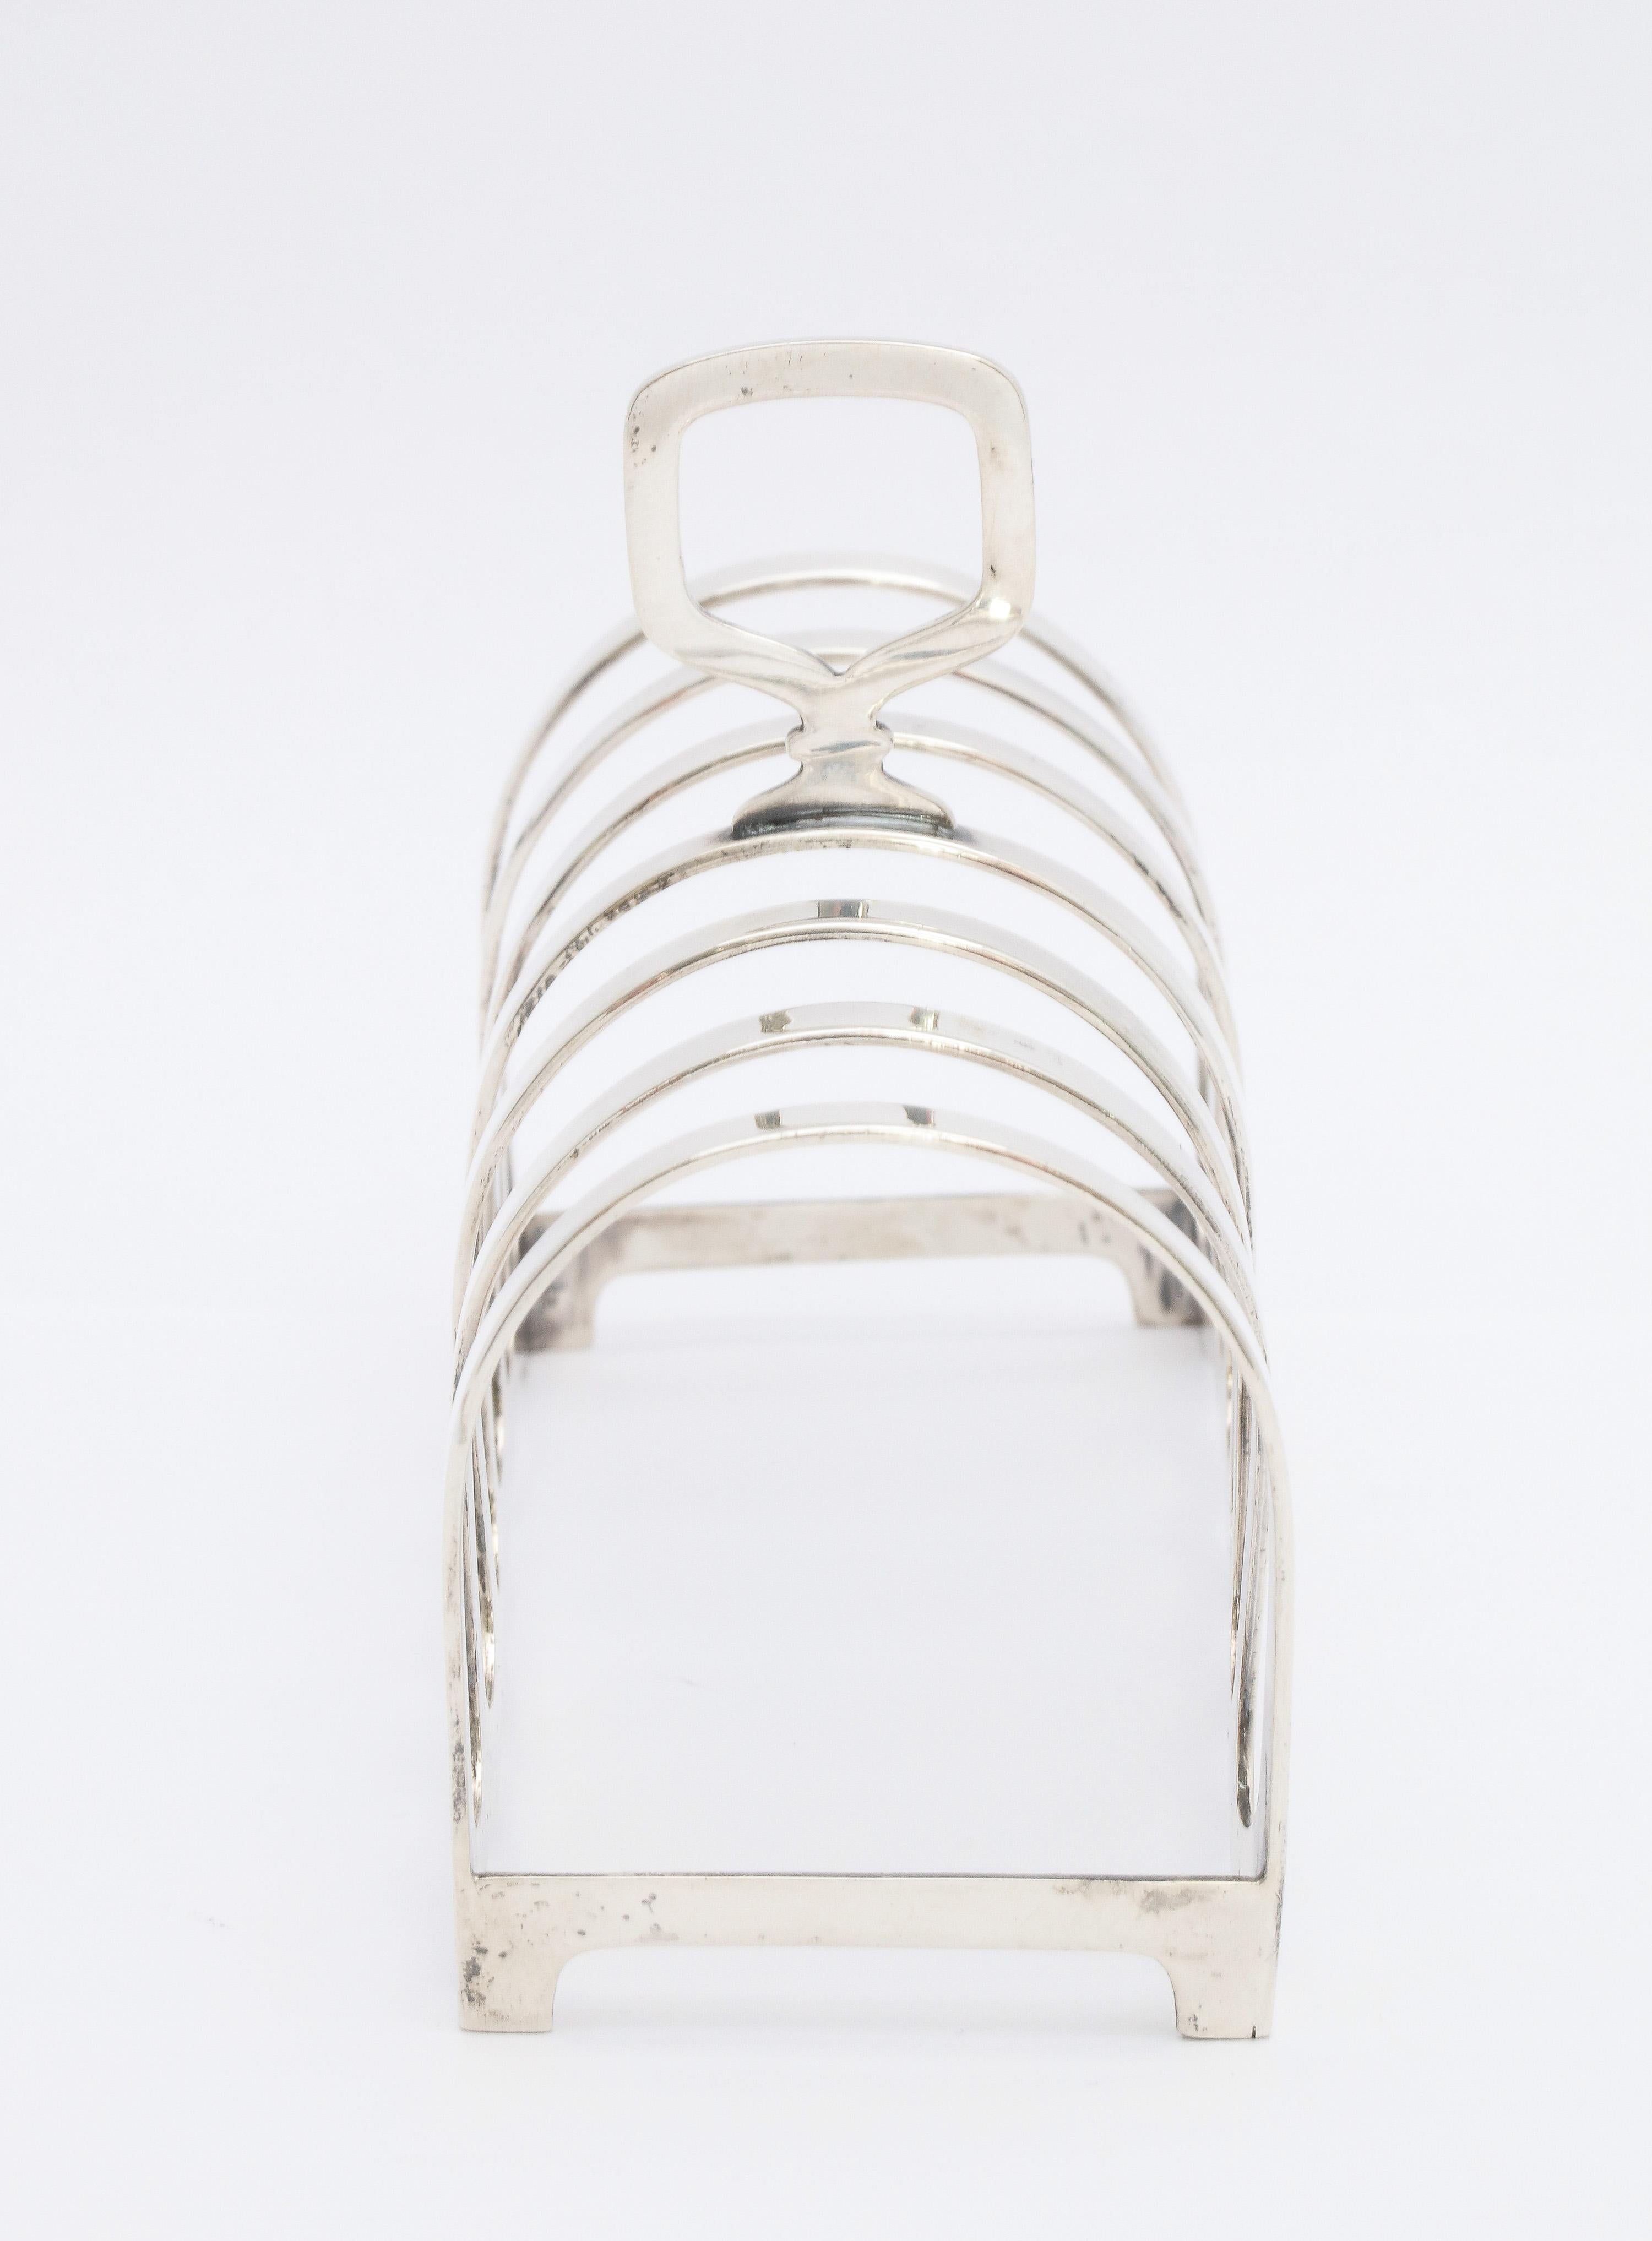 Mid-20th Century Edwardian, Style Sterling Silver Toast Rack For Sale